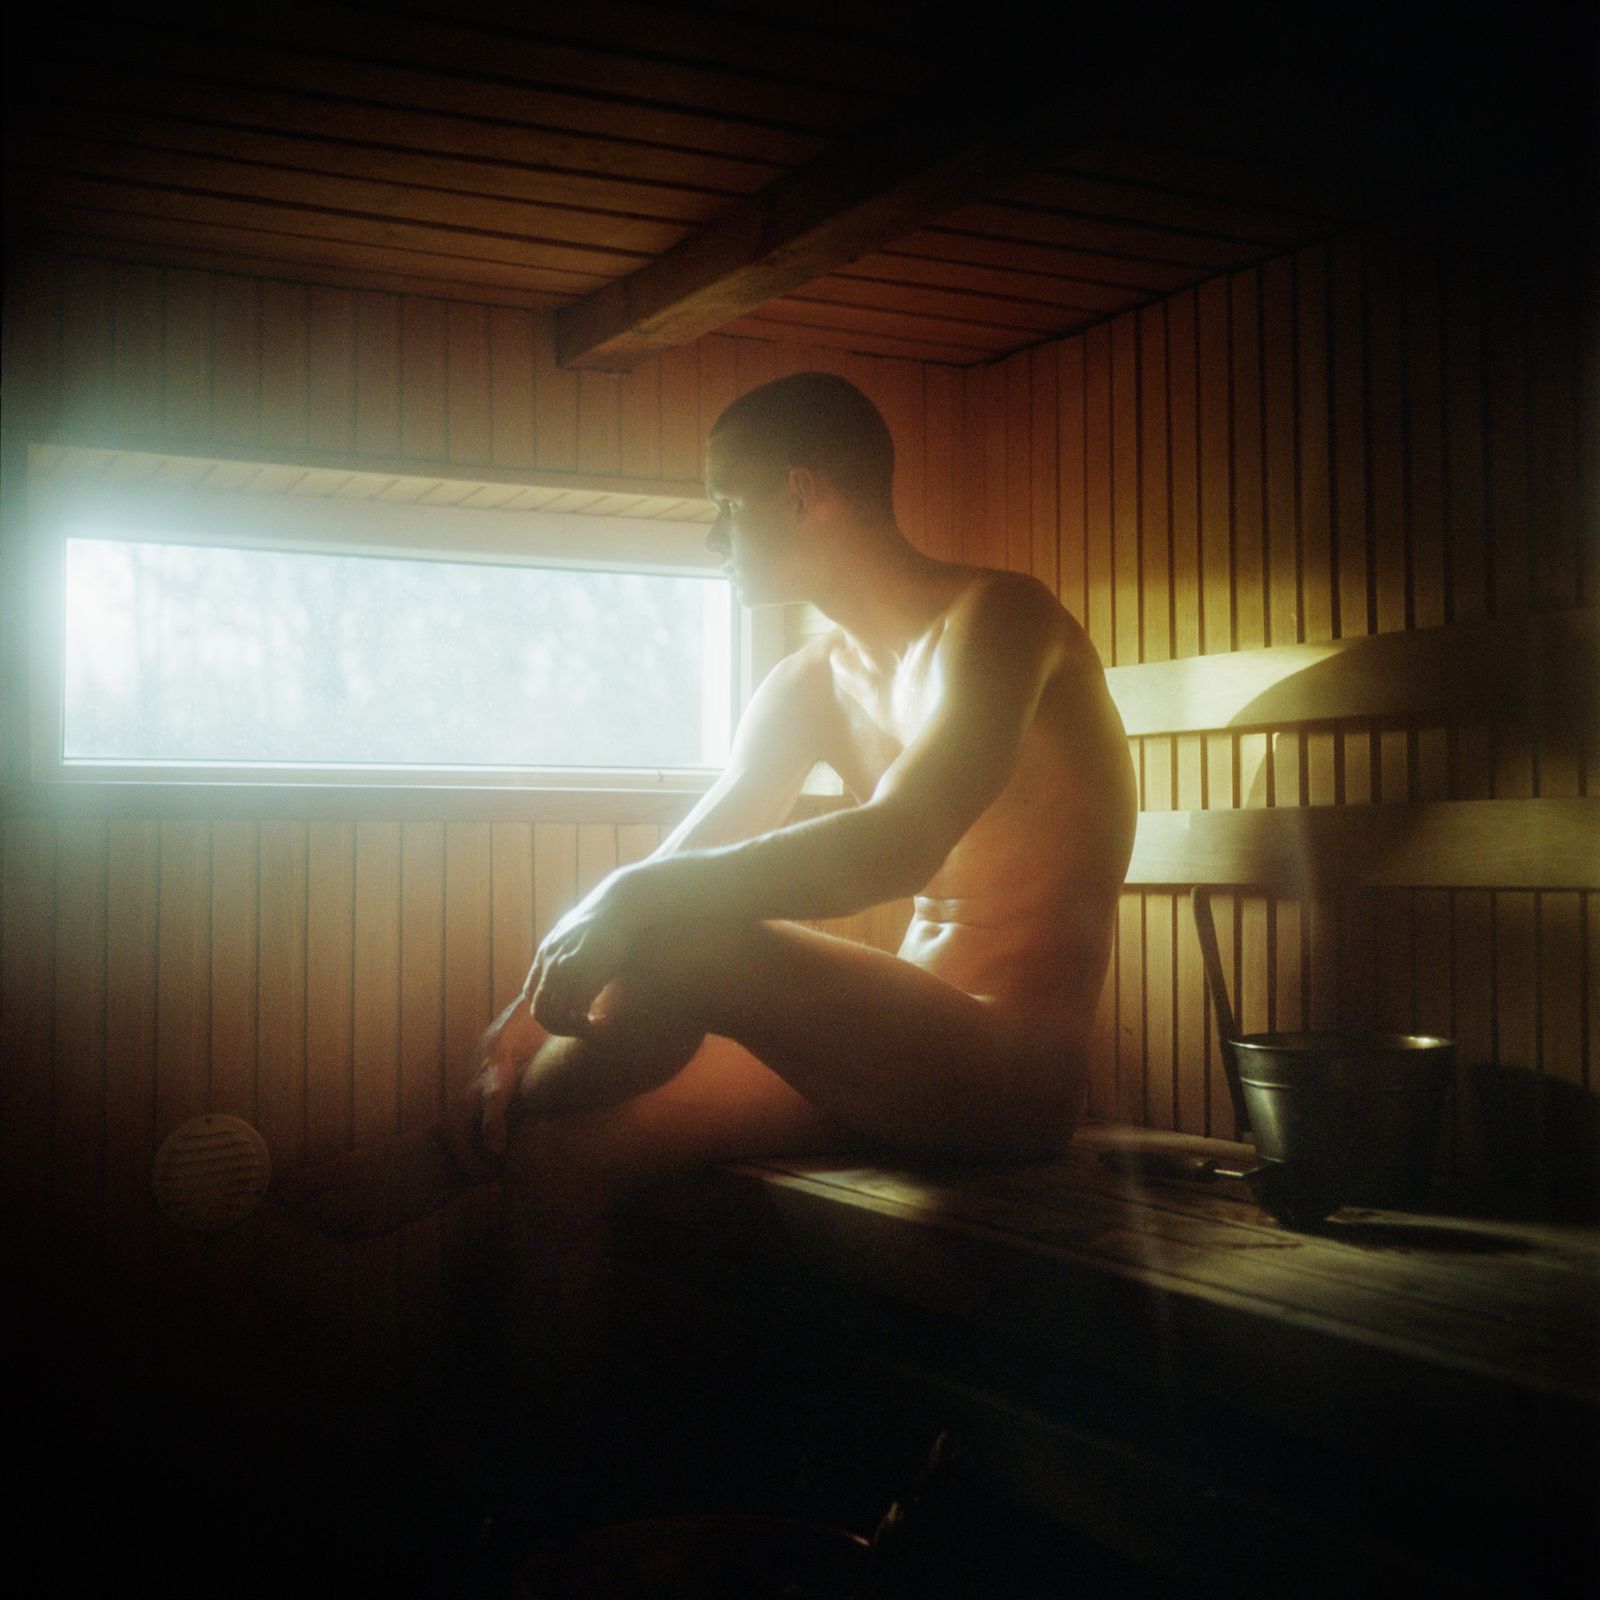 © Jérémie Jung - Martin rests in his sauna after helping his family to clean up the house before the long traditional Christmas celebrations.